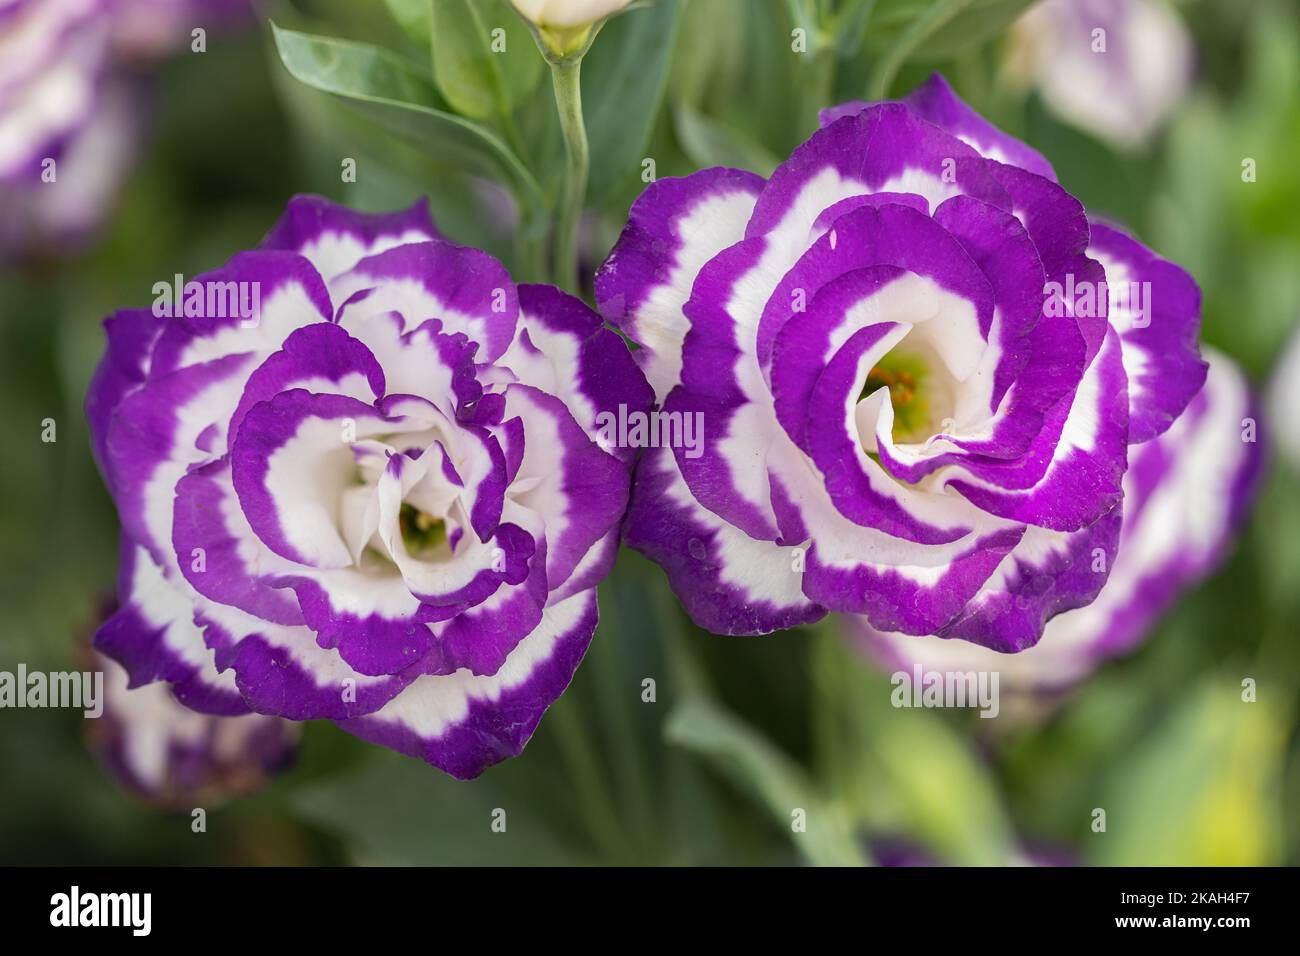 Close up of Lisianthus flowers or Eustoma plants blossom in flower garden Stock Photo